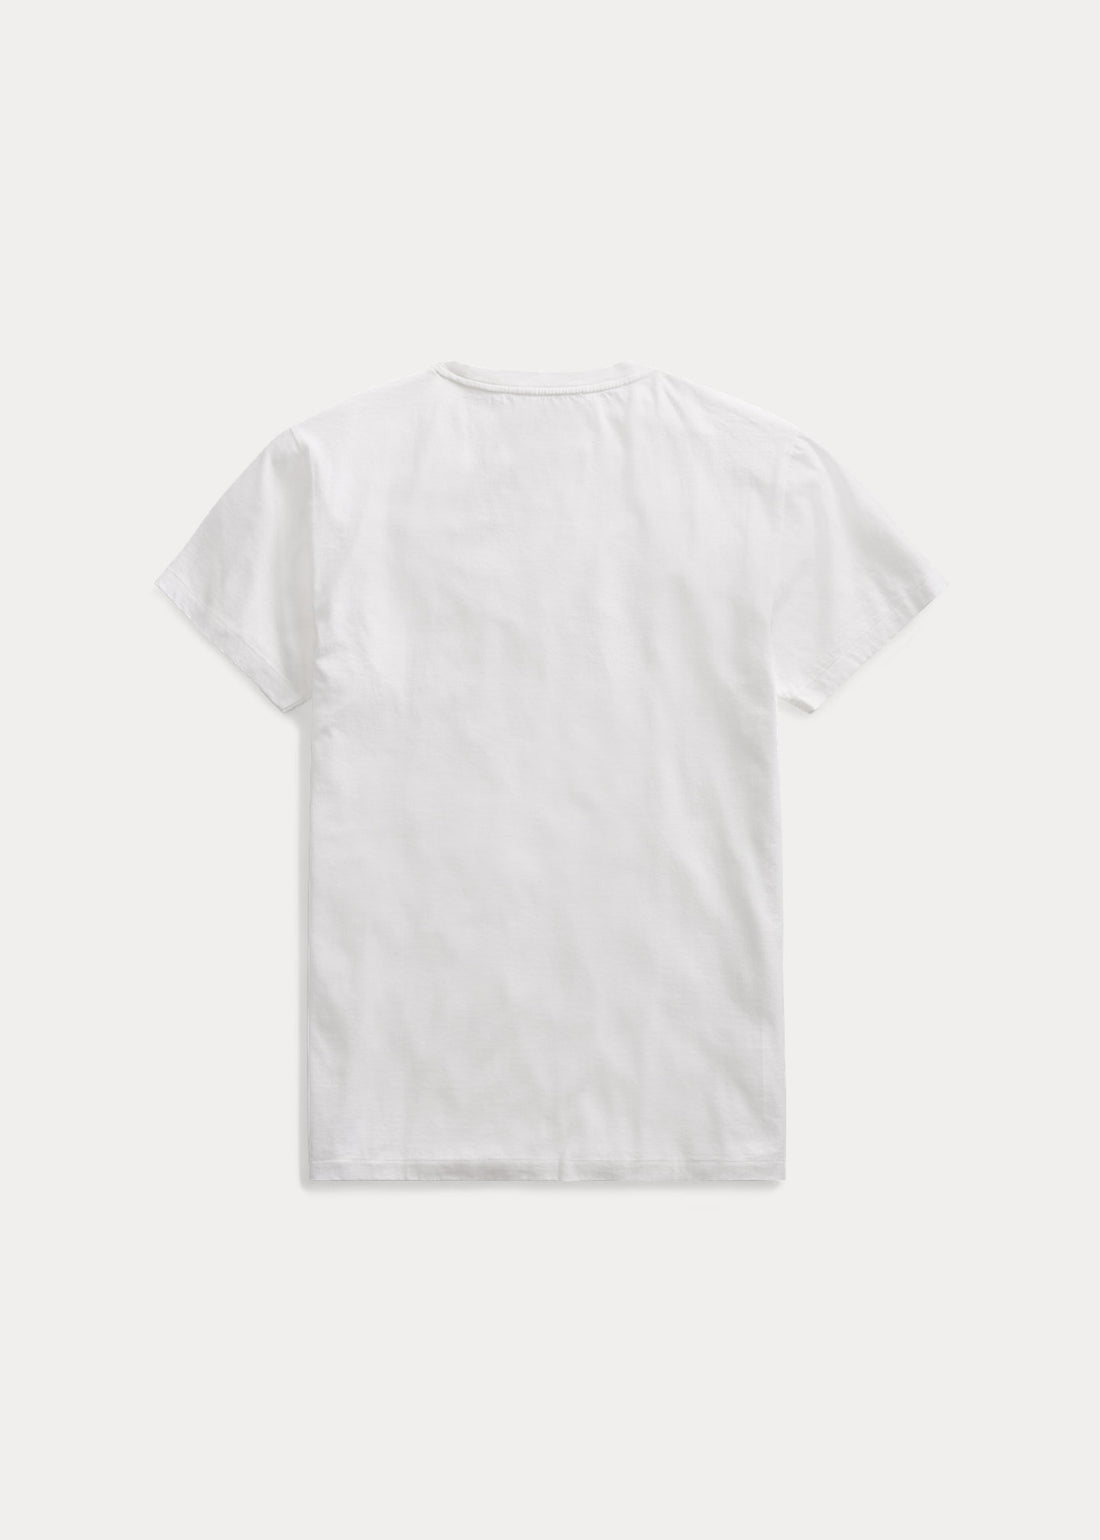 Double RL - Jersey Pocket T-Shirt in White